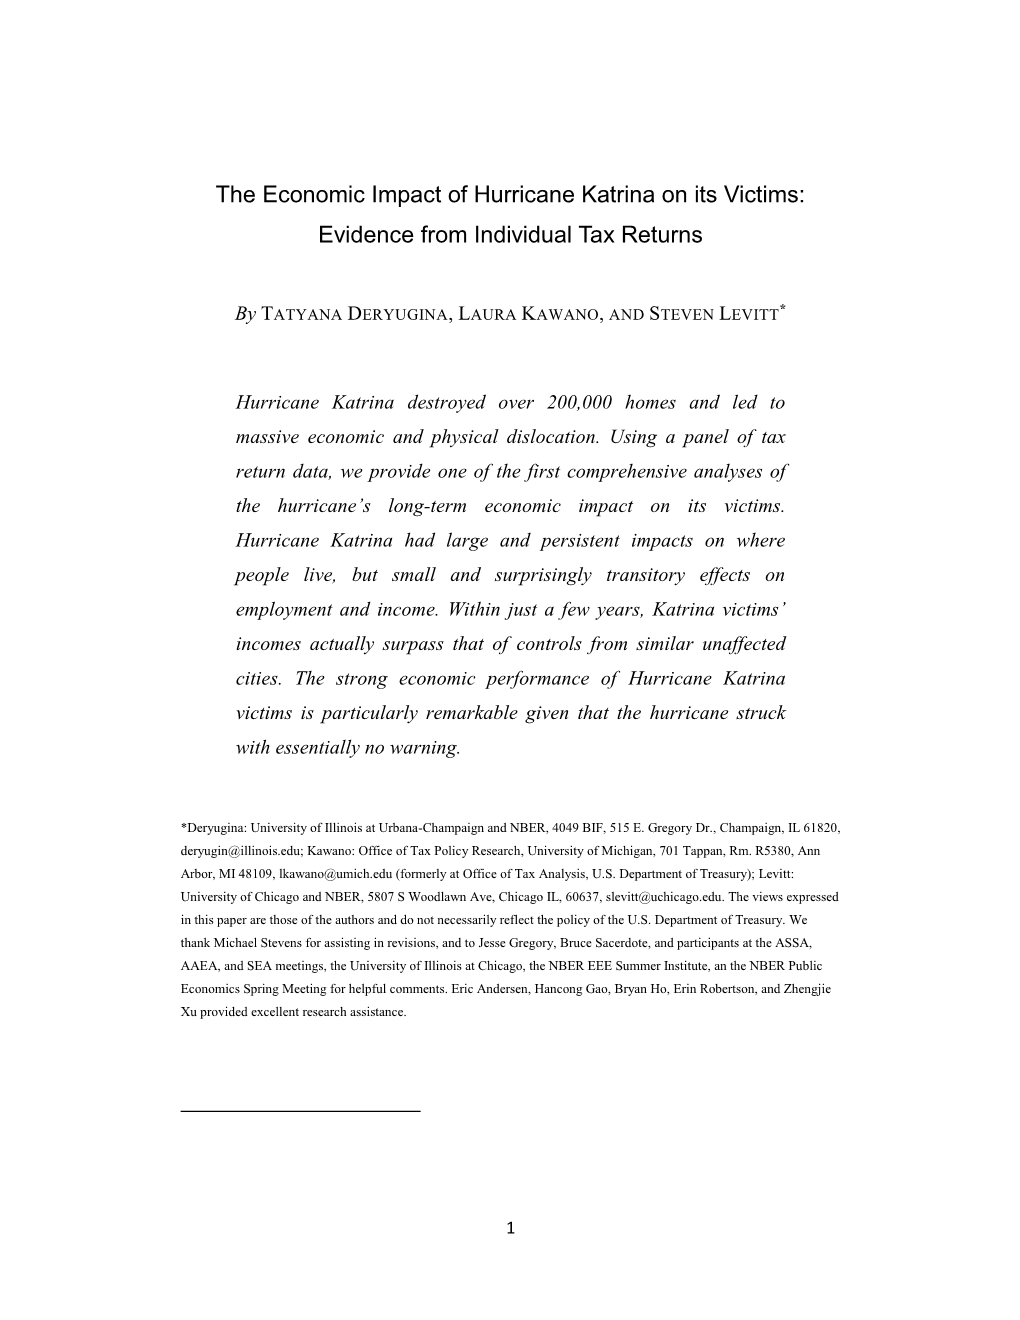 The Economic Impact of Hurricane Katrina on Its Victims: Evidence from Individual Tax Returns